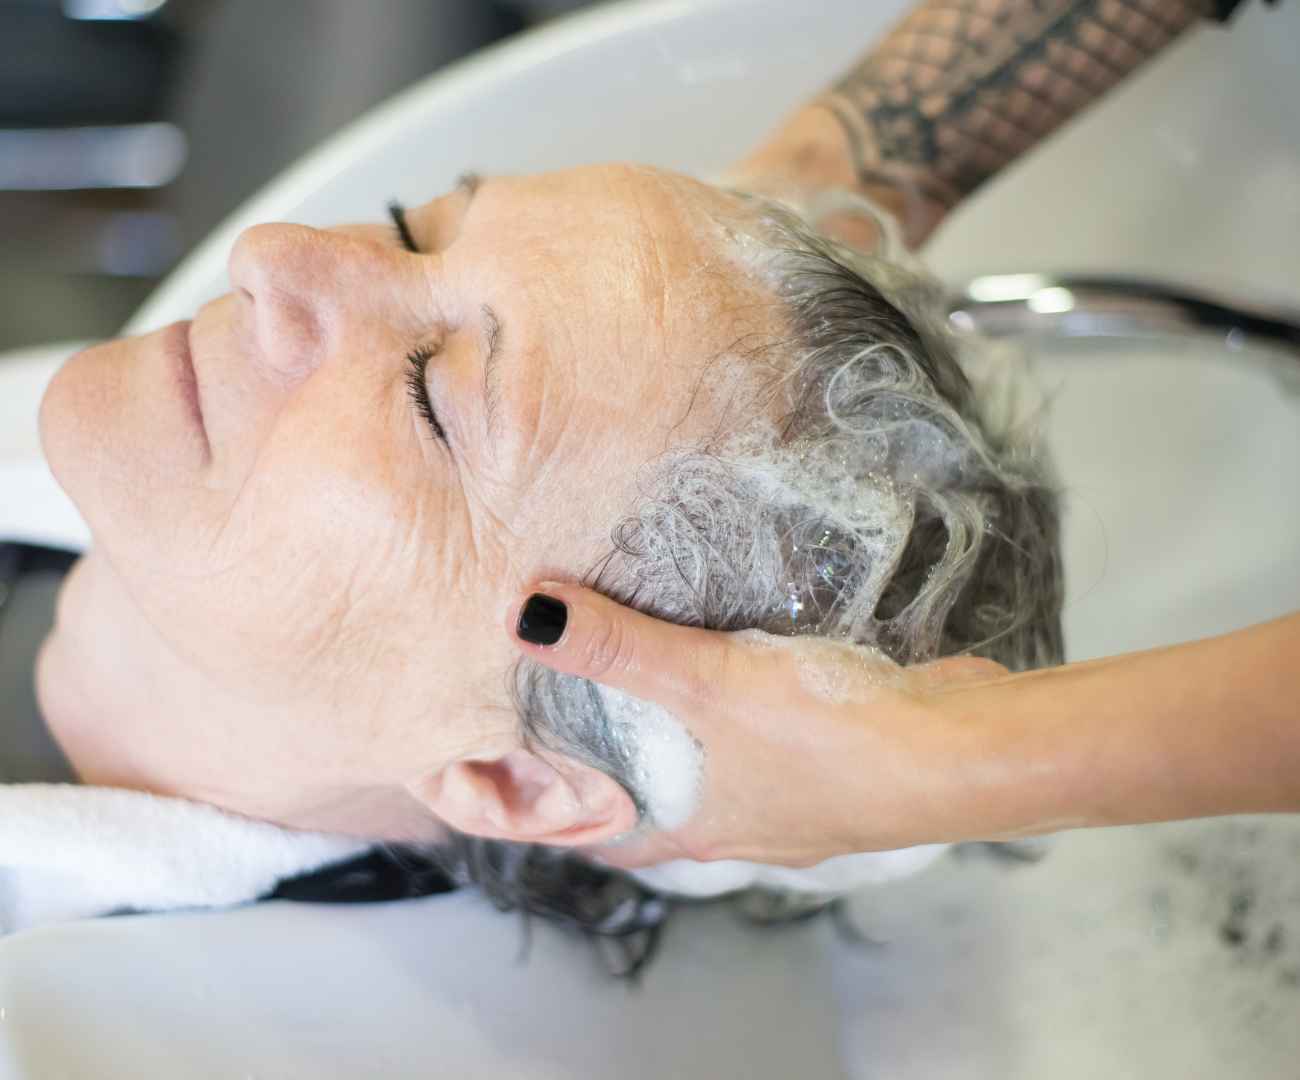 image of female having her grey hair washed at a hairdresser's basin to illustrate this guide to vegan shampoo and conditioner brands